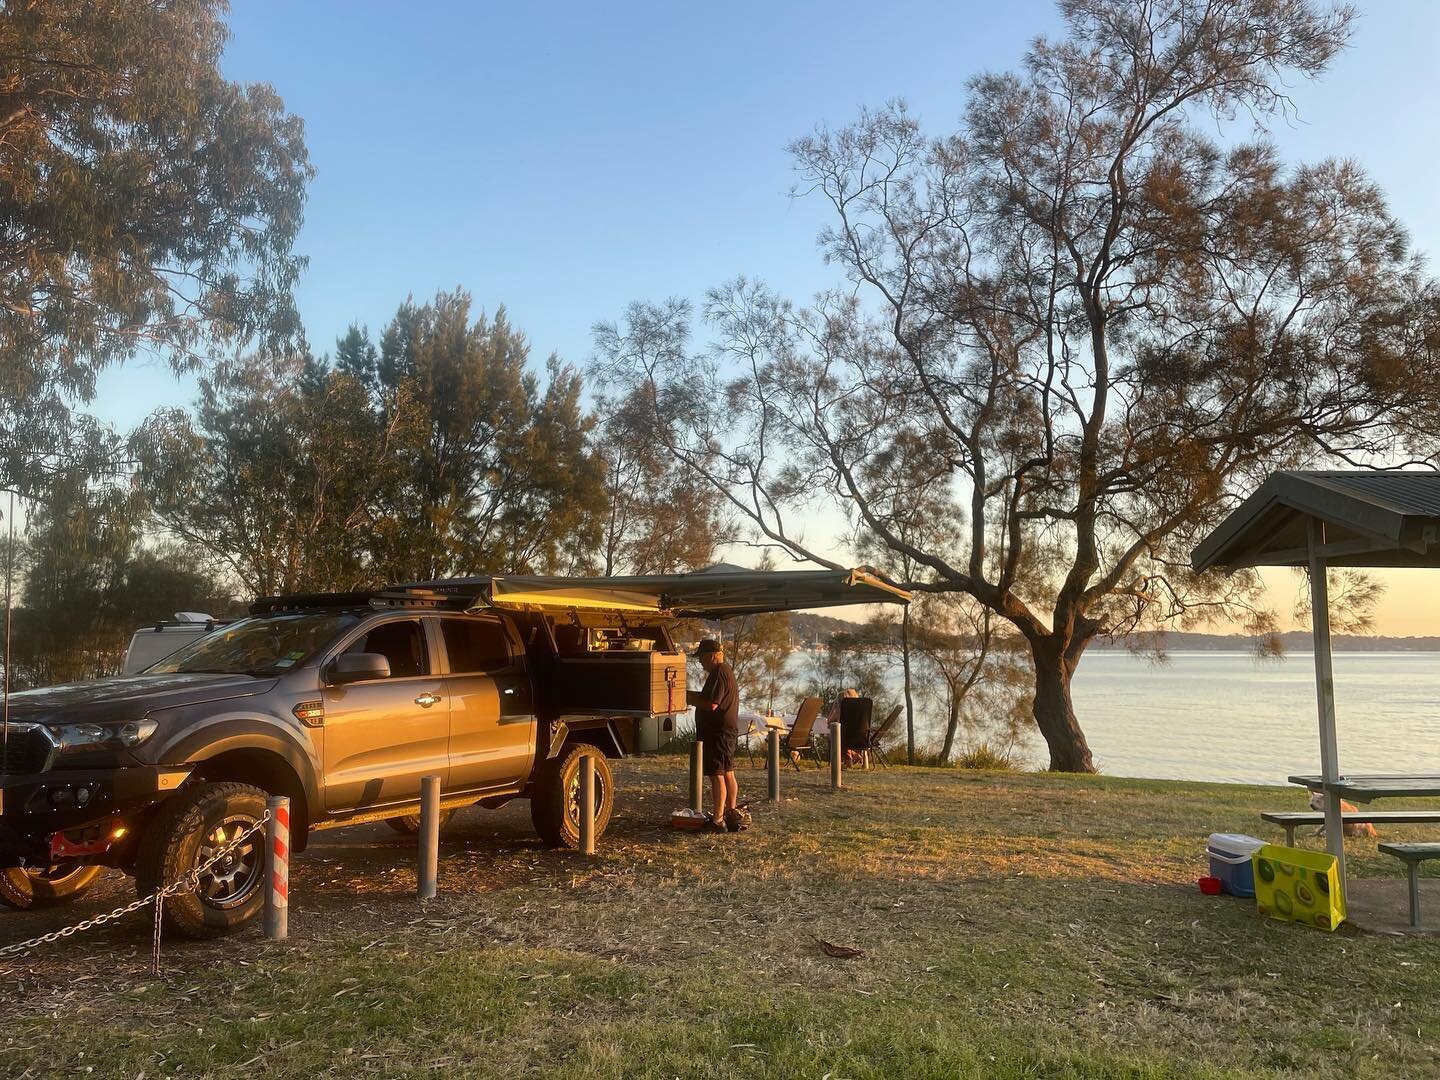 Cooking dinner with a stunning view! 
-
-
-
#ec4campers #beachcamping  #eastcoastaustralia #adventure #roadtripaustralia #camperhire  #travelaustralia #4wd #visitnsw #thelegendarypacificcoast